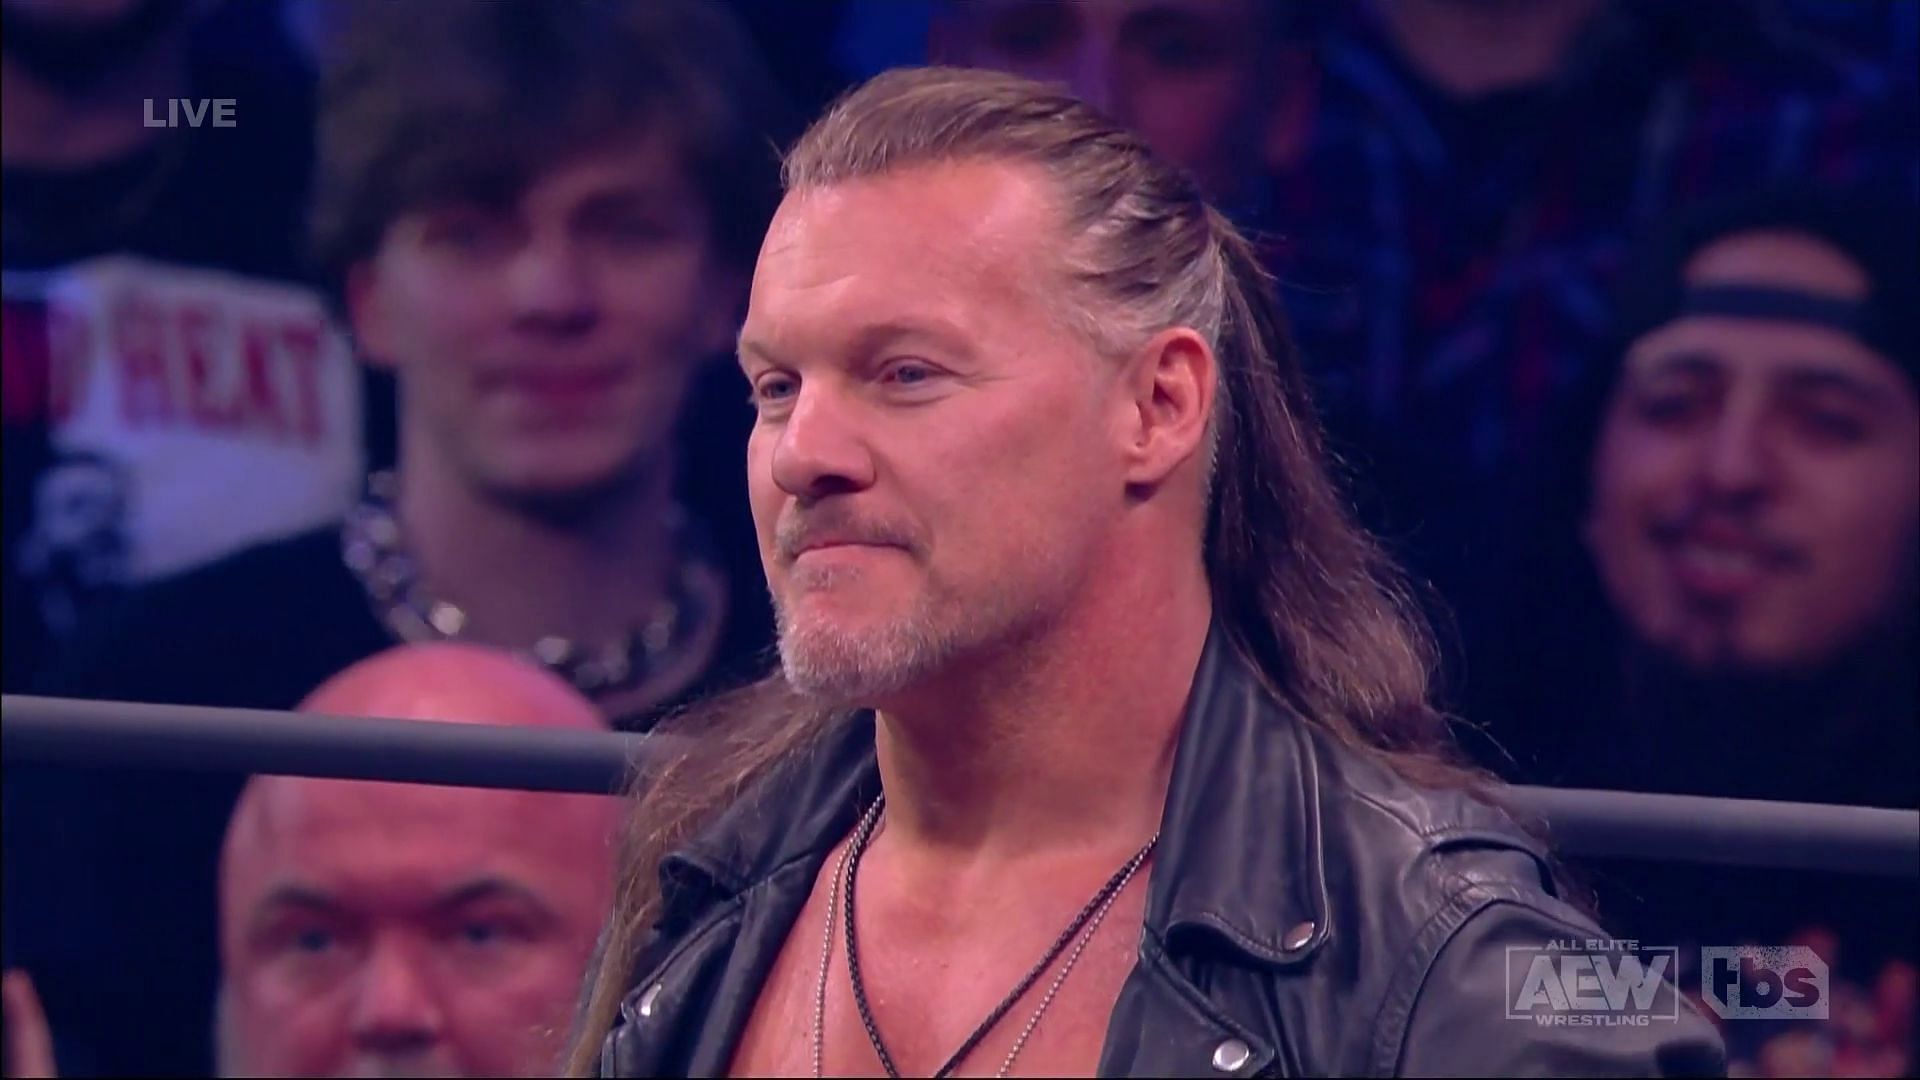 Chris Jericho has been wrestling for over 30 years at this point.